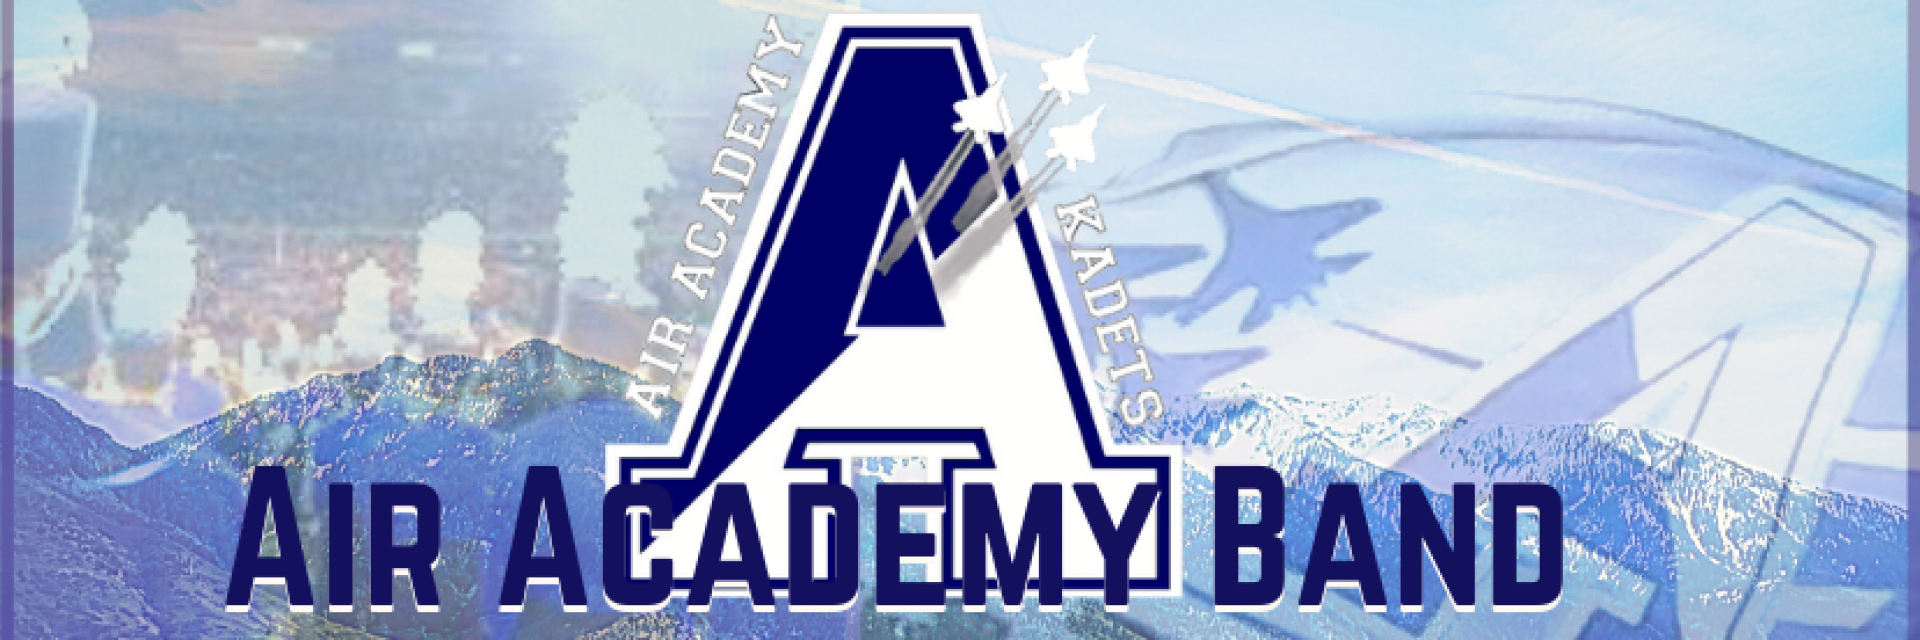 Welcome to the Air Academy Band Program Website!